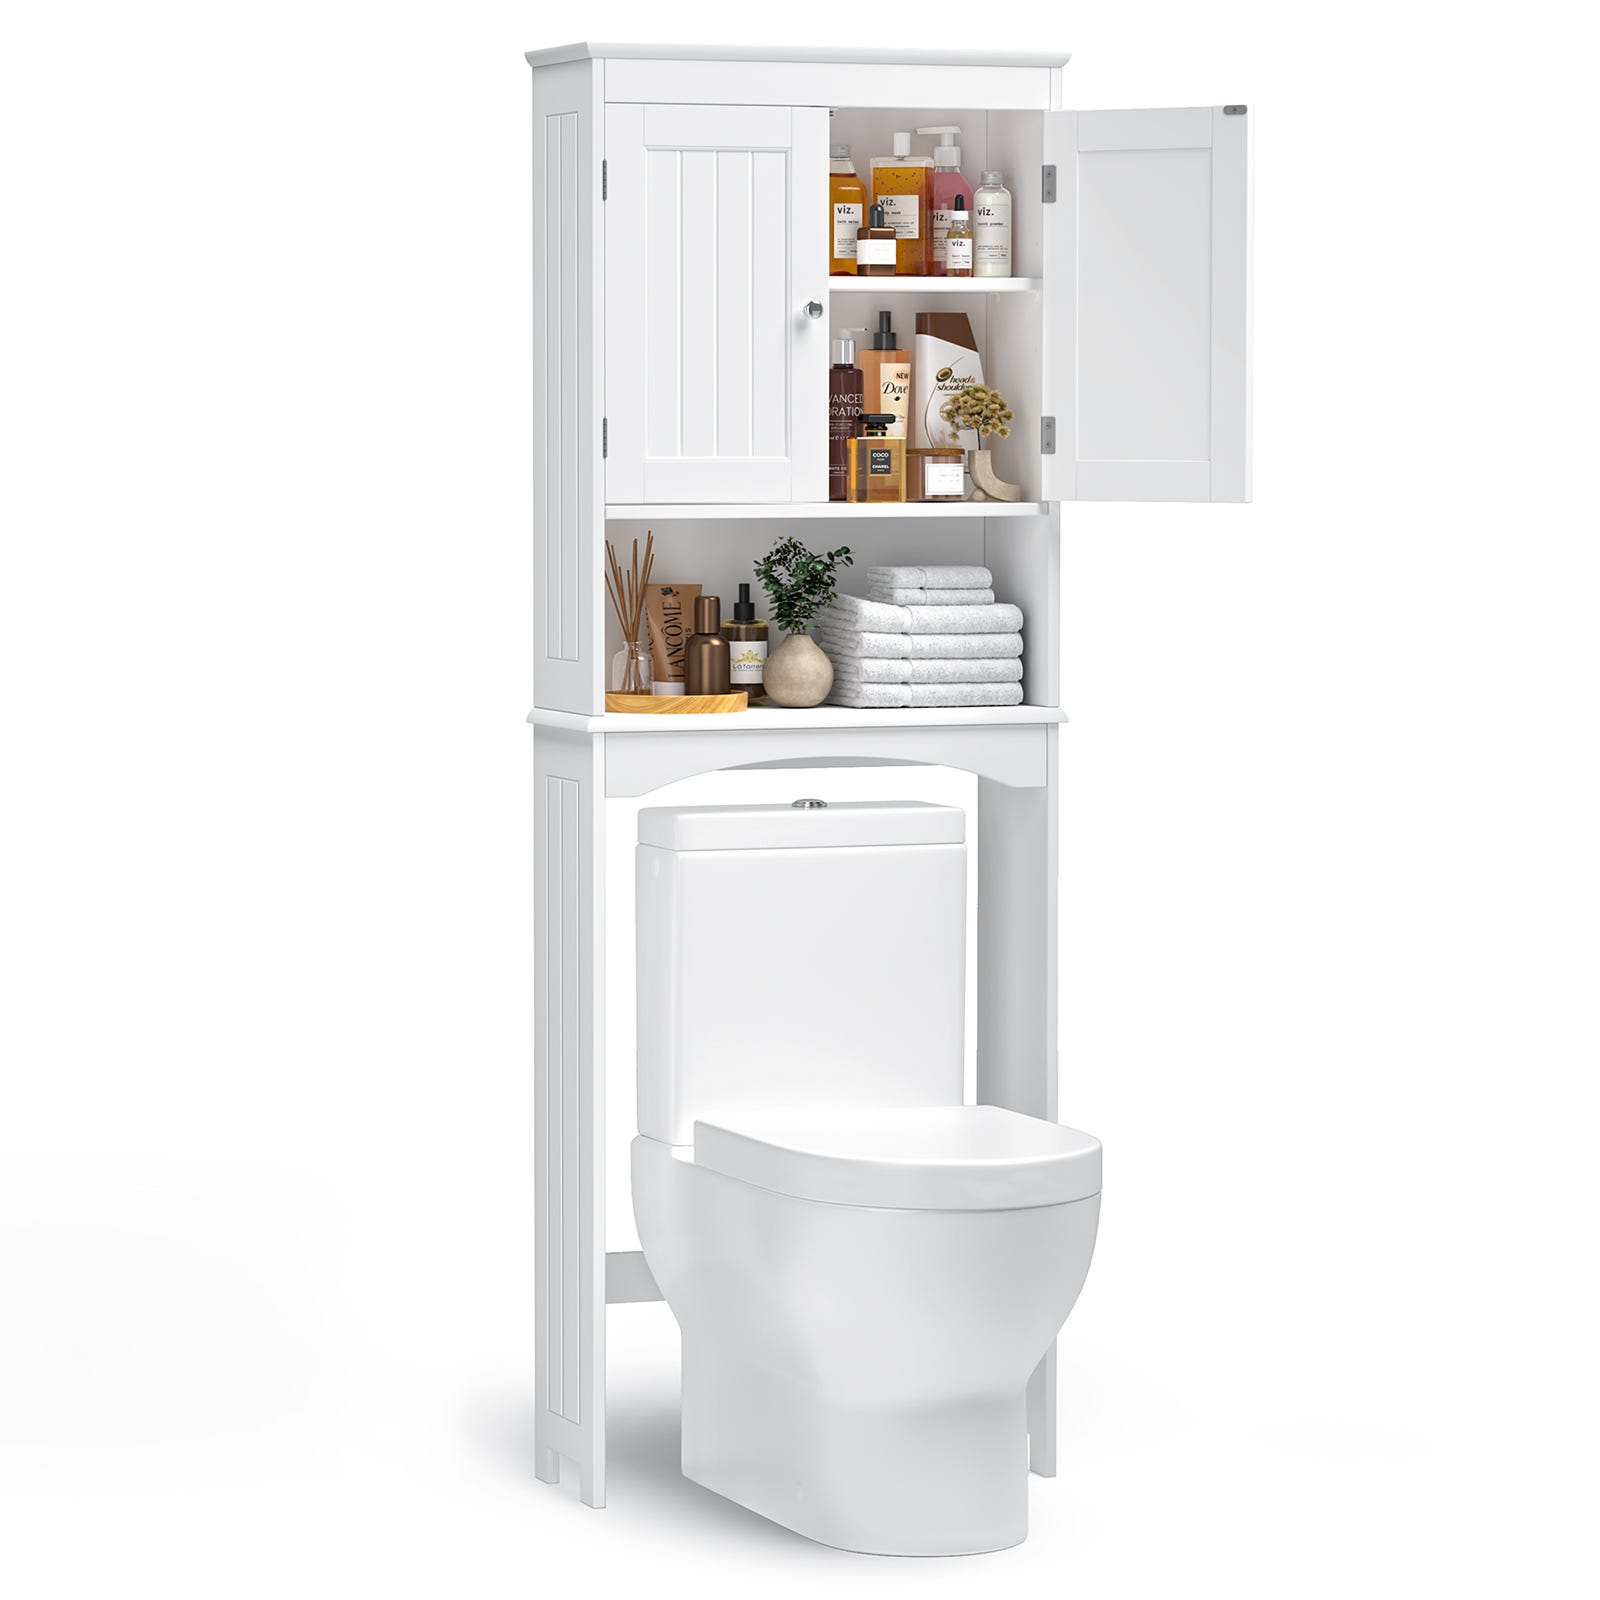 Meuble WC meuble dessus toilettes style cosy bambou, Leroy Merlin